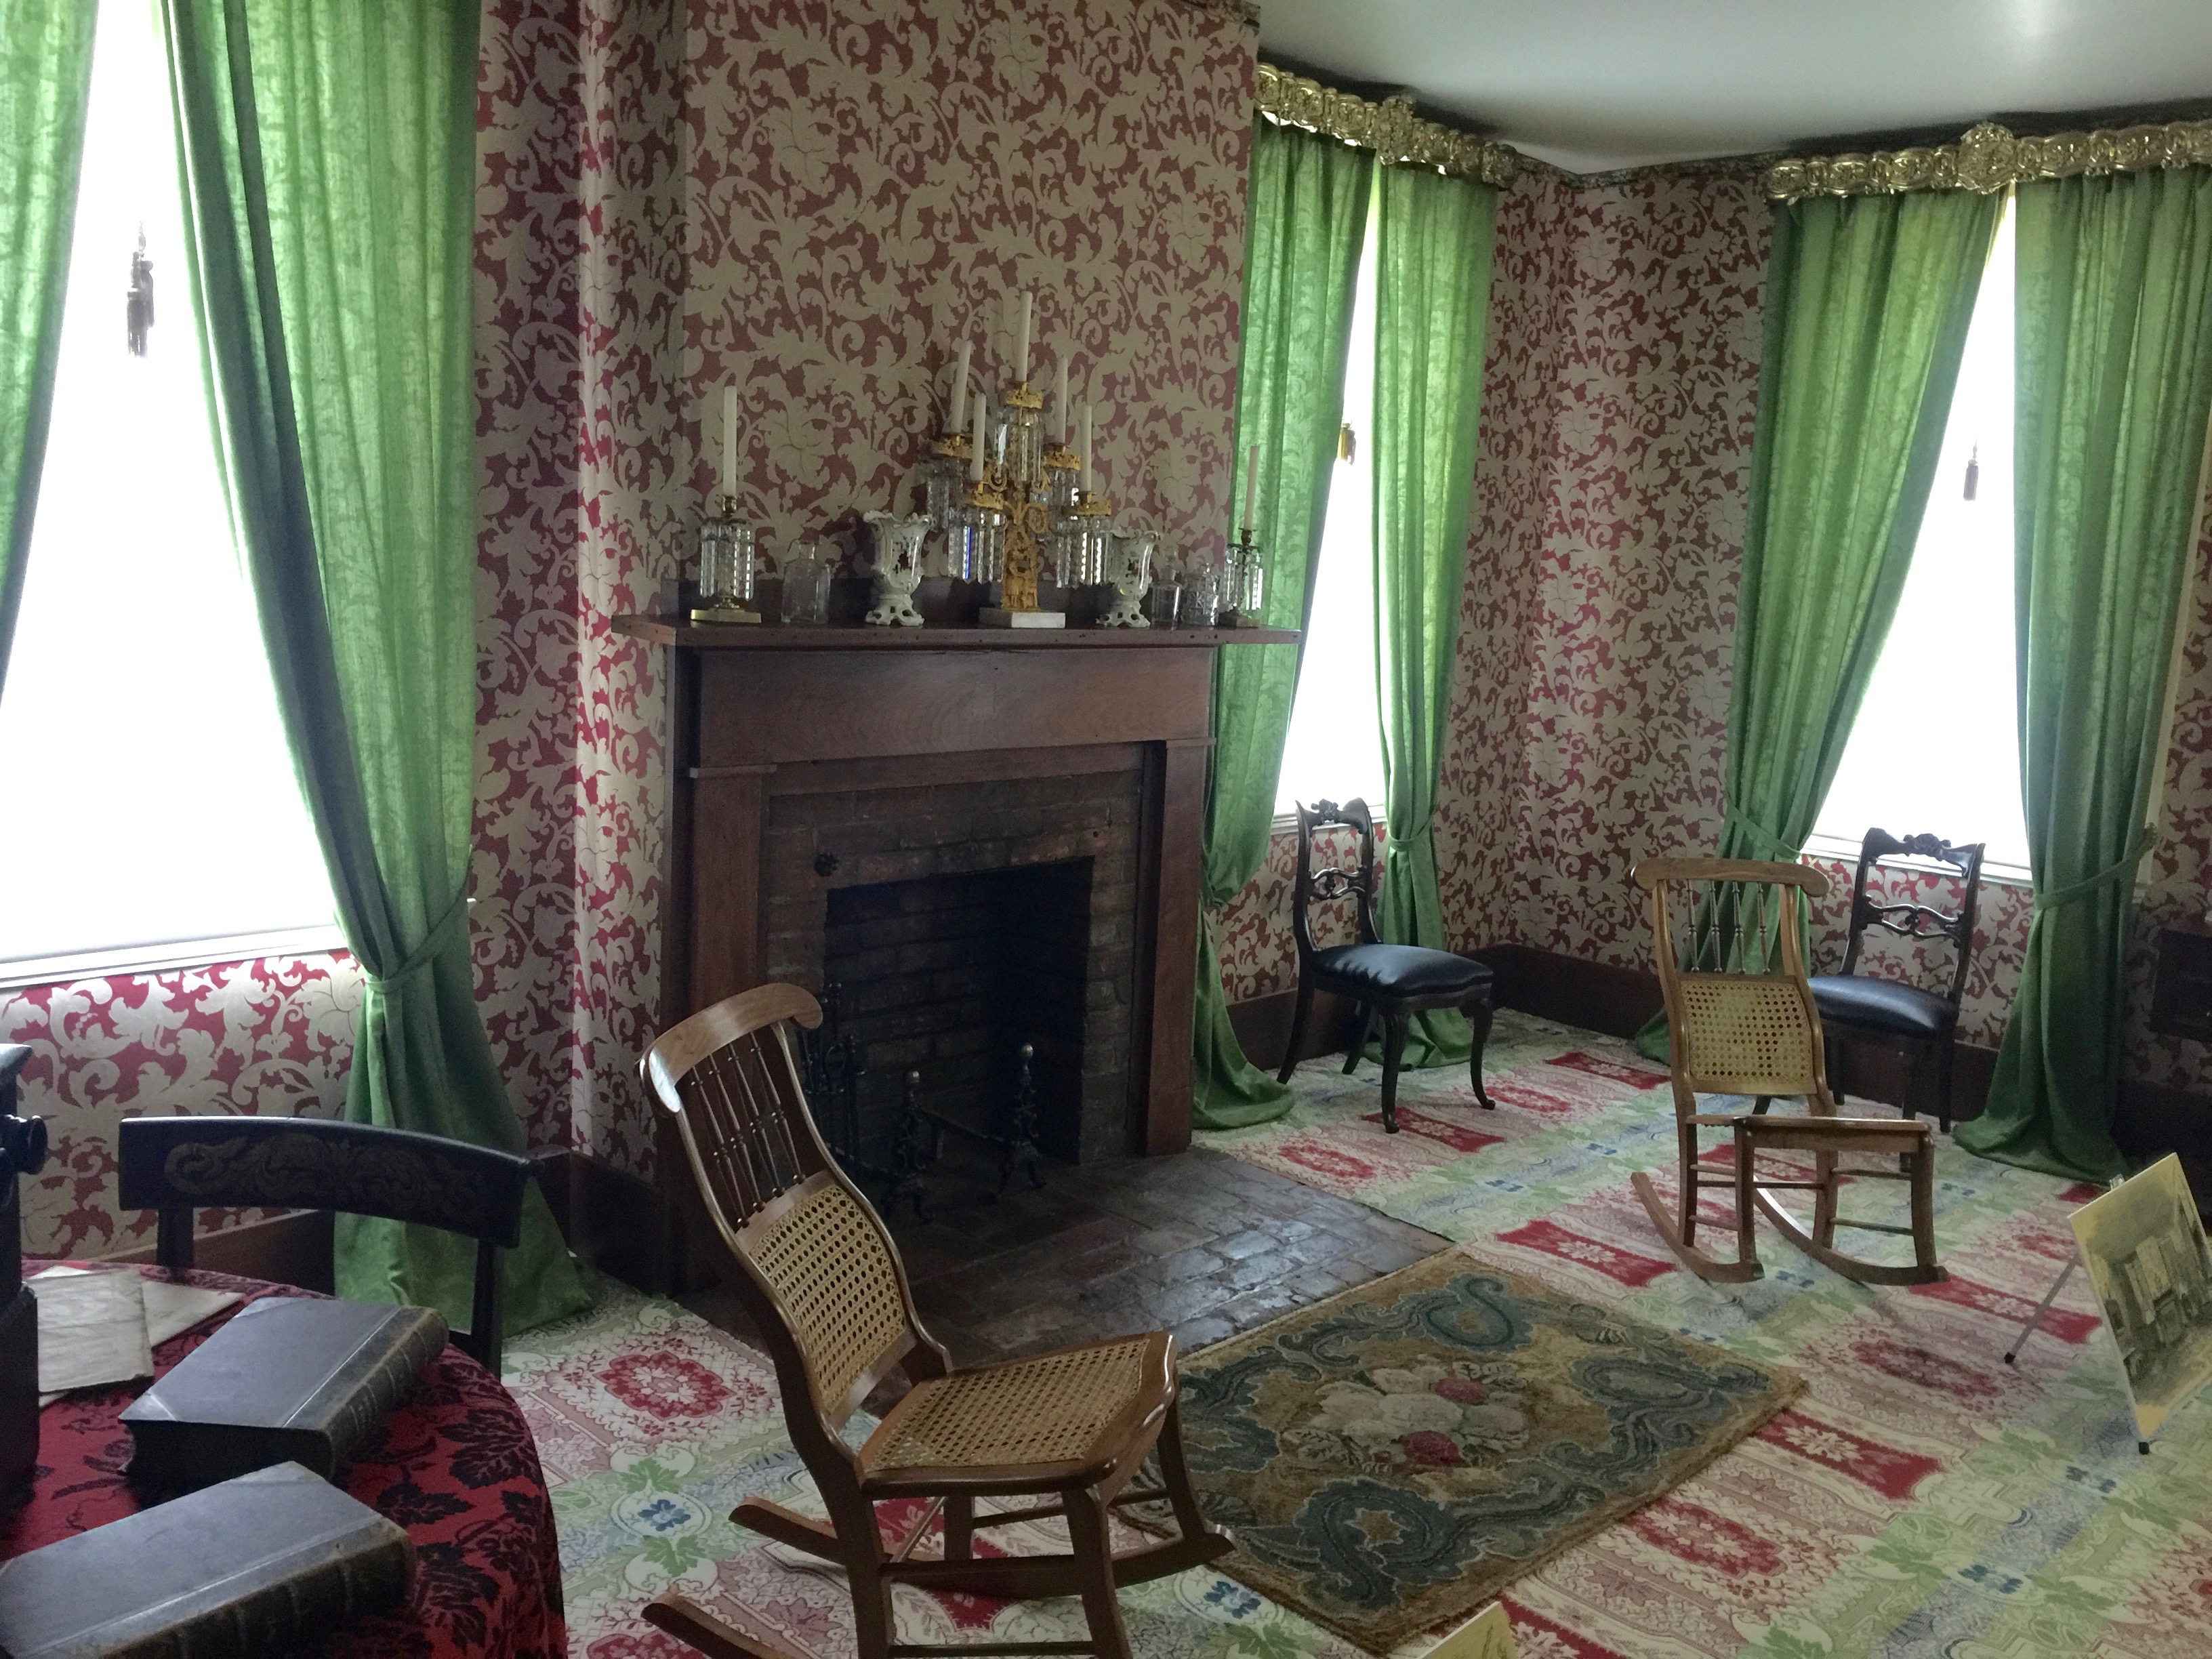 The Lincoln family room